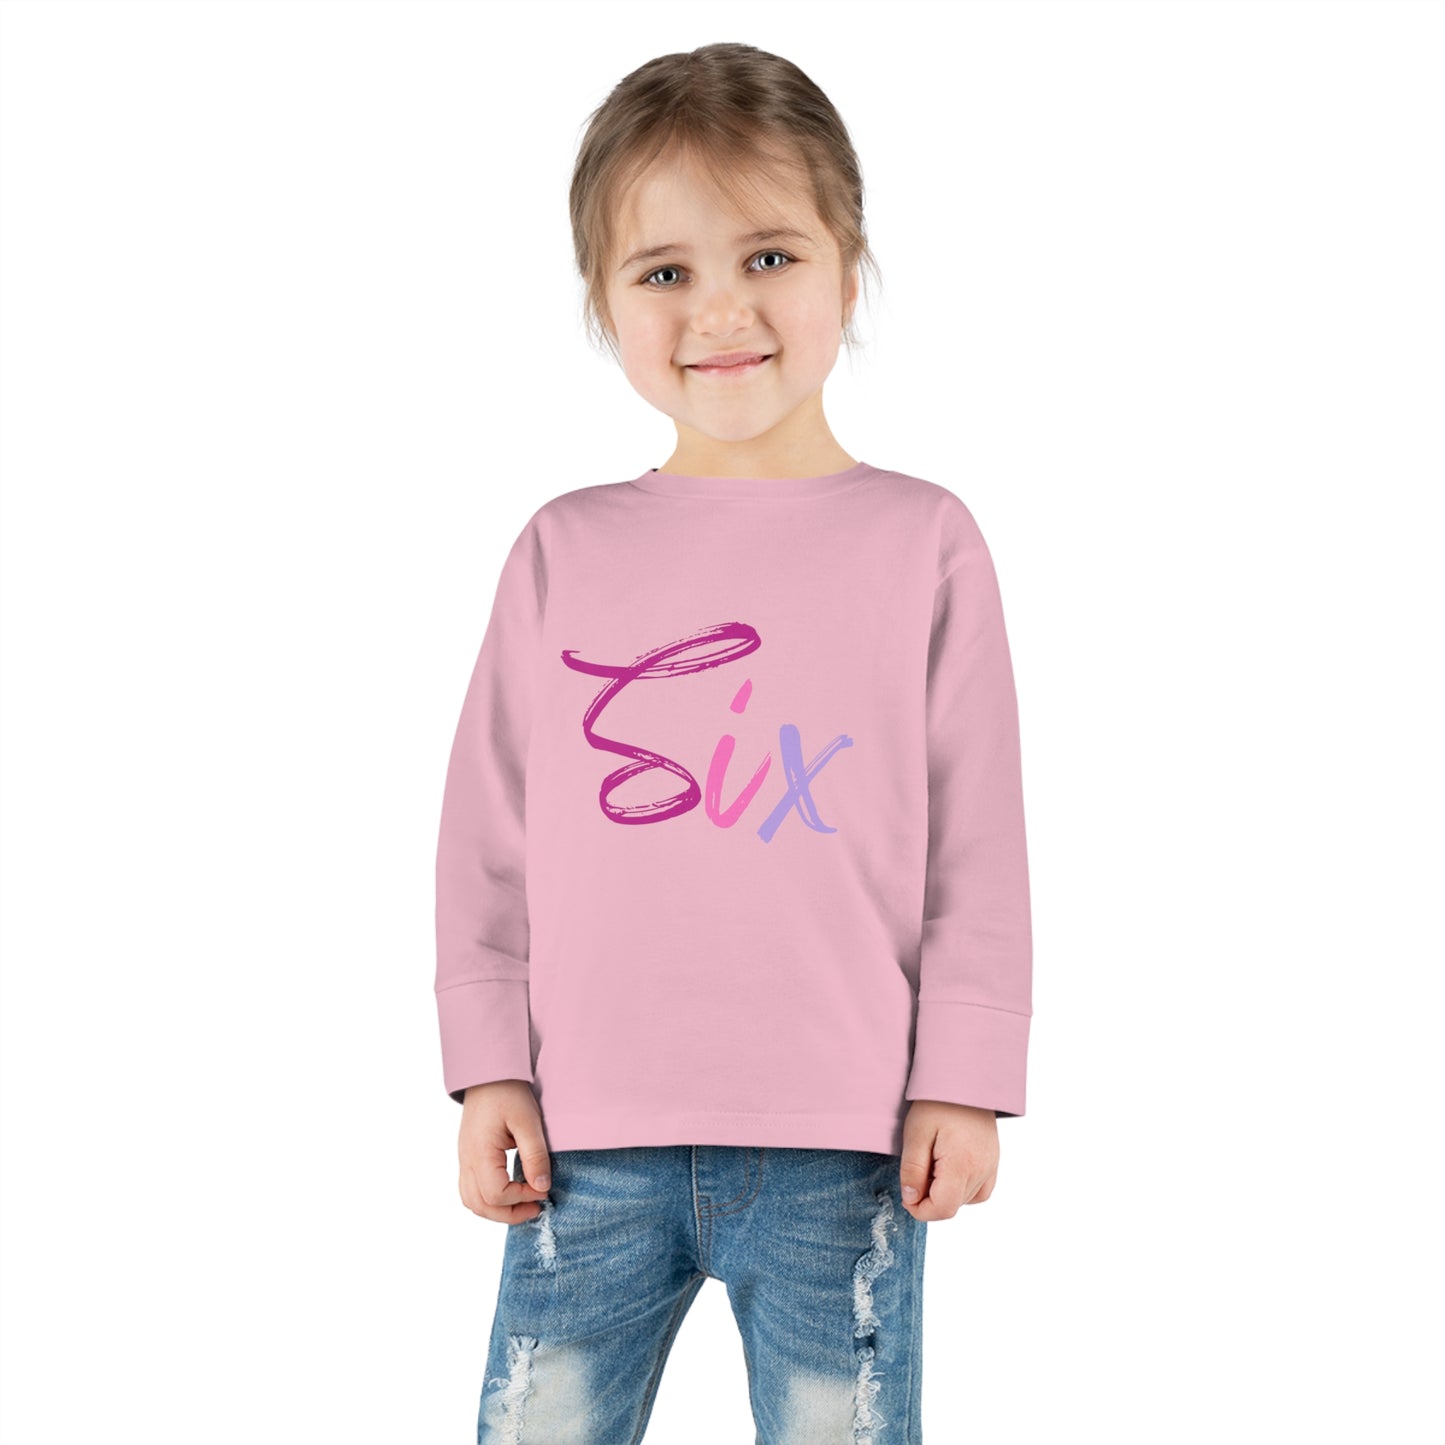 Long Sleeve Age Tee Shirt For 6 Year Old Unisex Kids